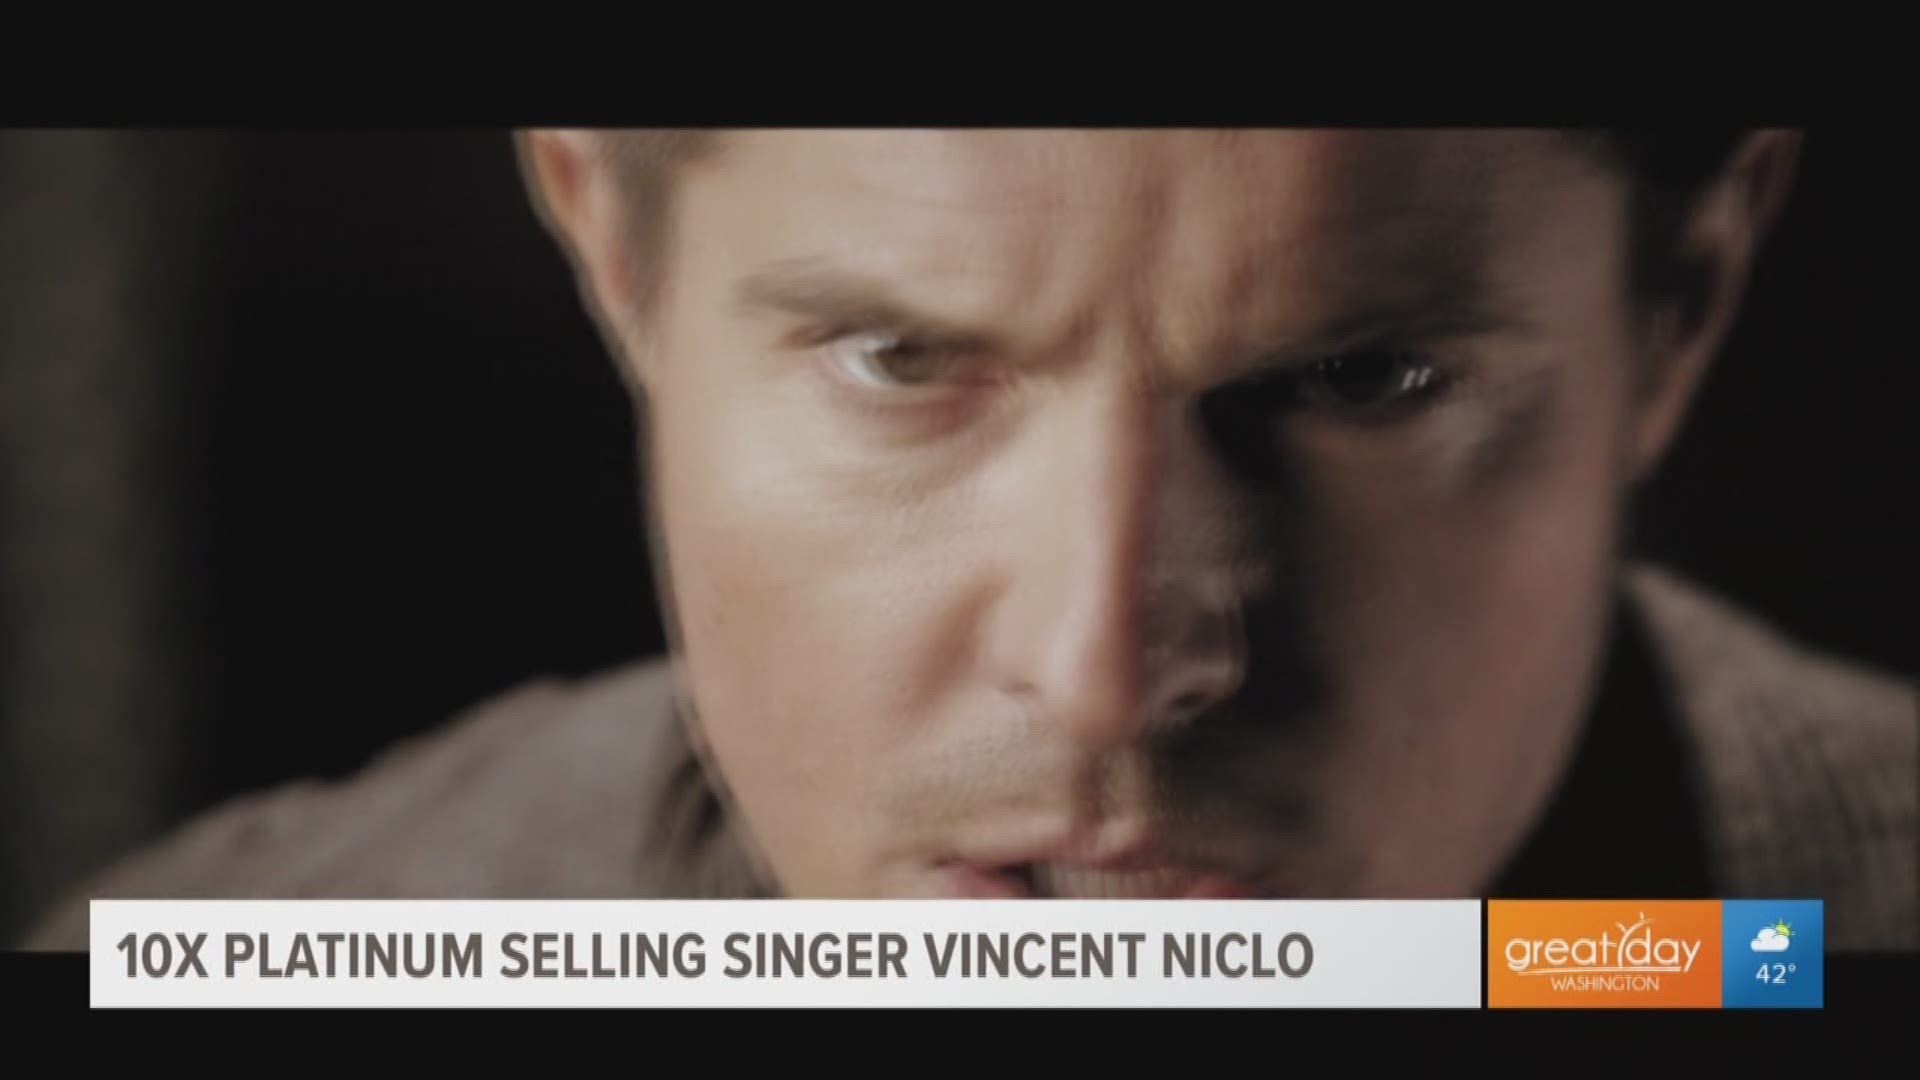 Vincent Niclo is a French Pop Opera singer who's touring the U.S. with Sarah Brightman in support for his new studio album, "An Evening With Vincent Niclo".  They are performing at DAR Constitution Hall Tuesday night.